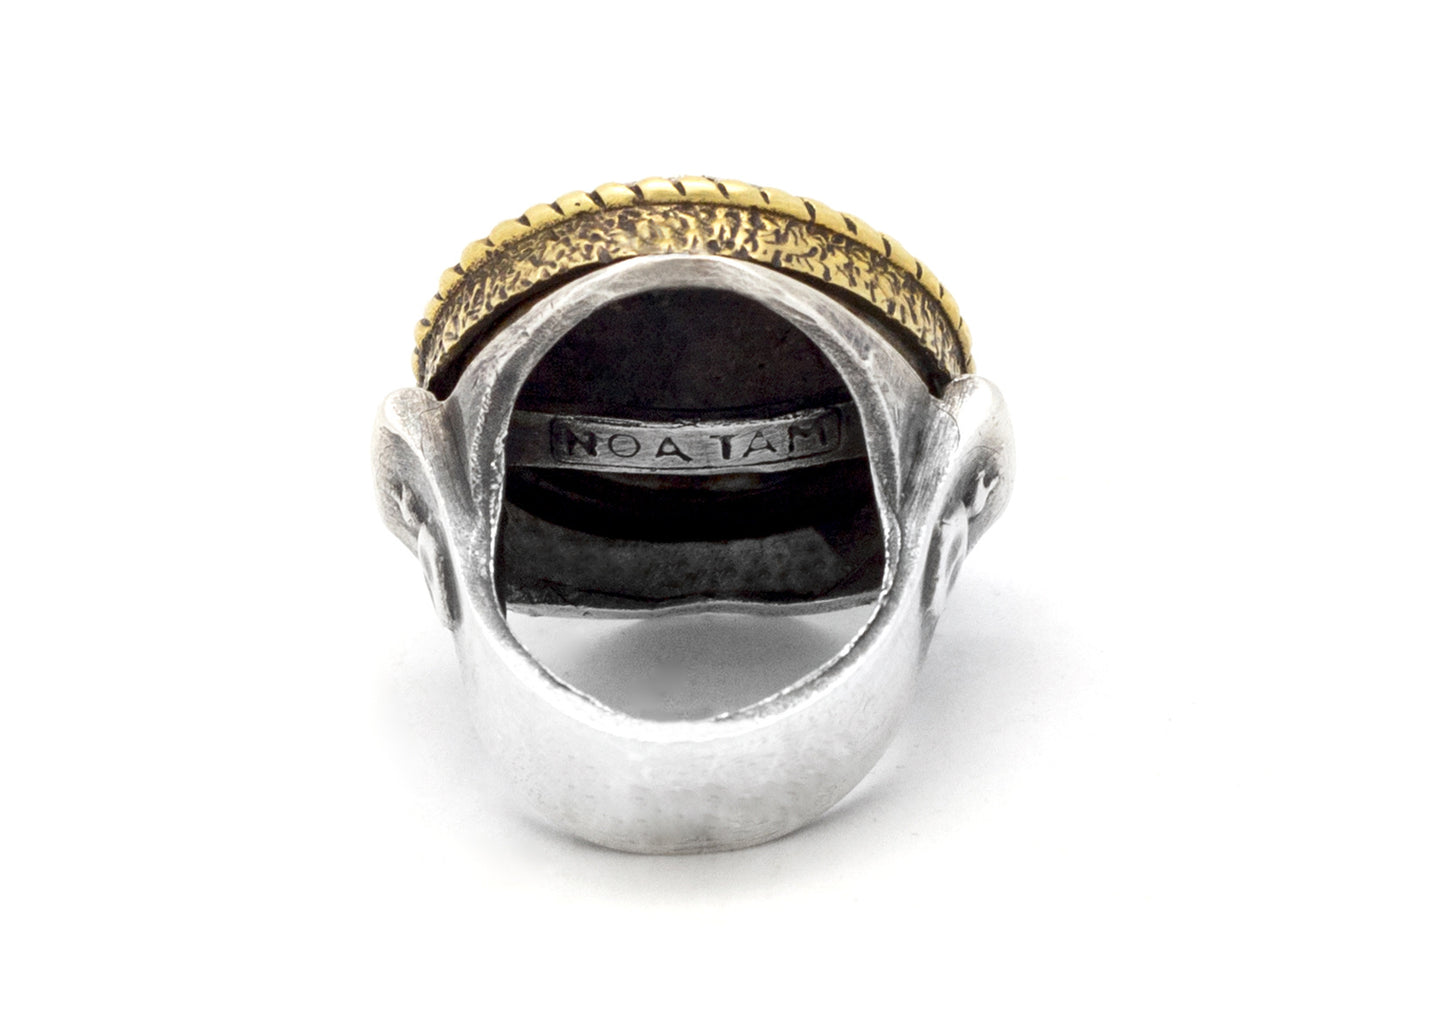 Coin ring with the open heart coin medallion